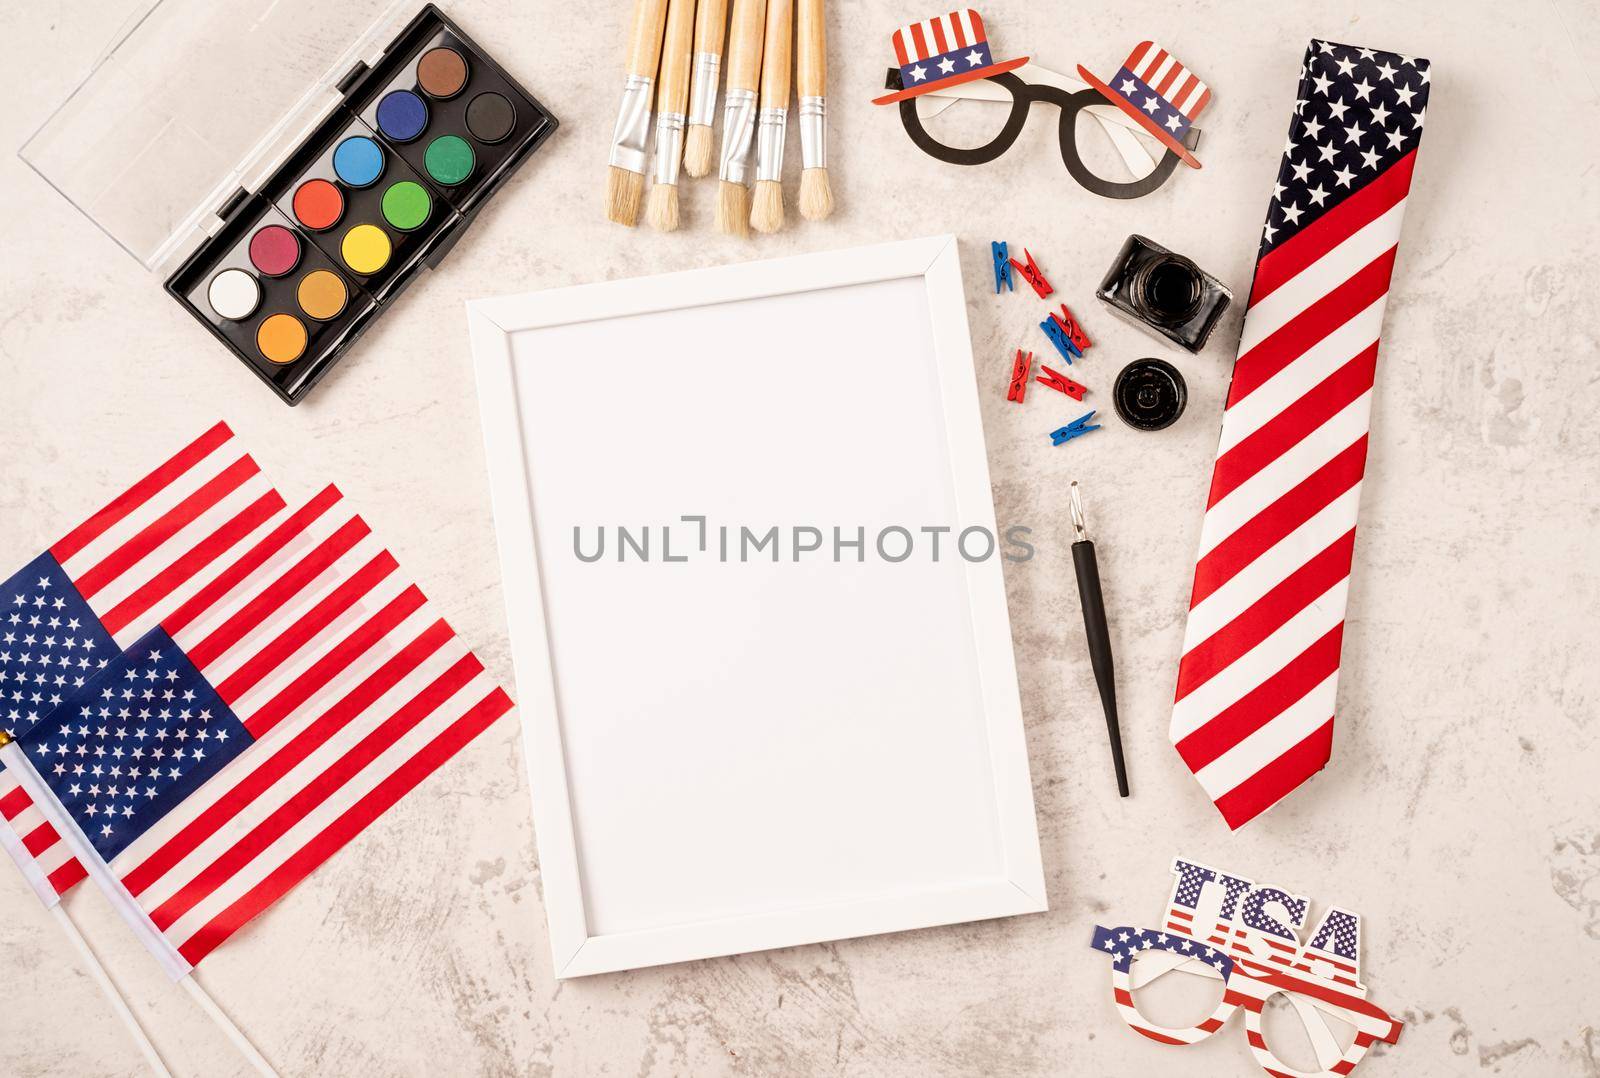 USA Memorial day, Presidents day, Veterans day, Labor day, or 4th of July celebration. Blank frame for mockup design with USA independence day party elements top view flat lay